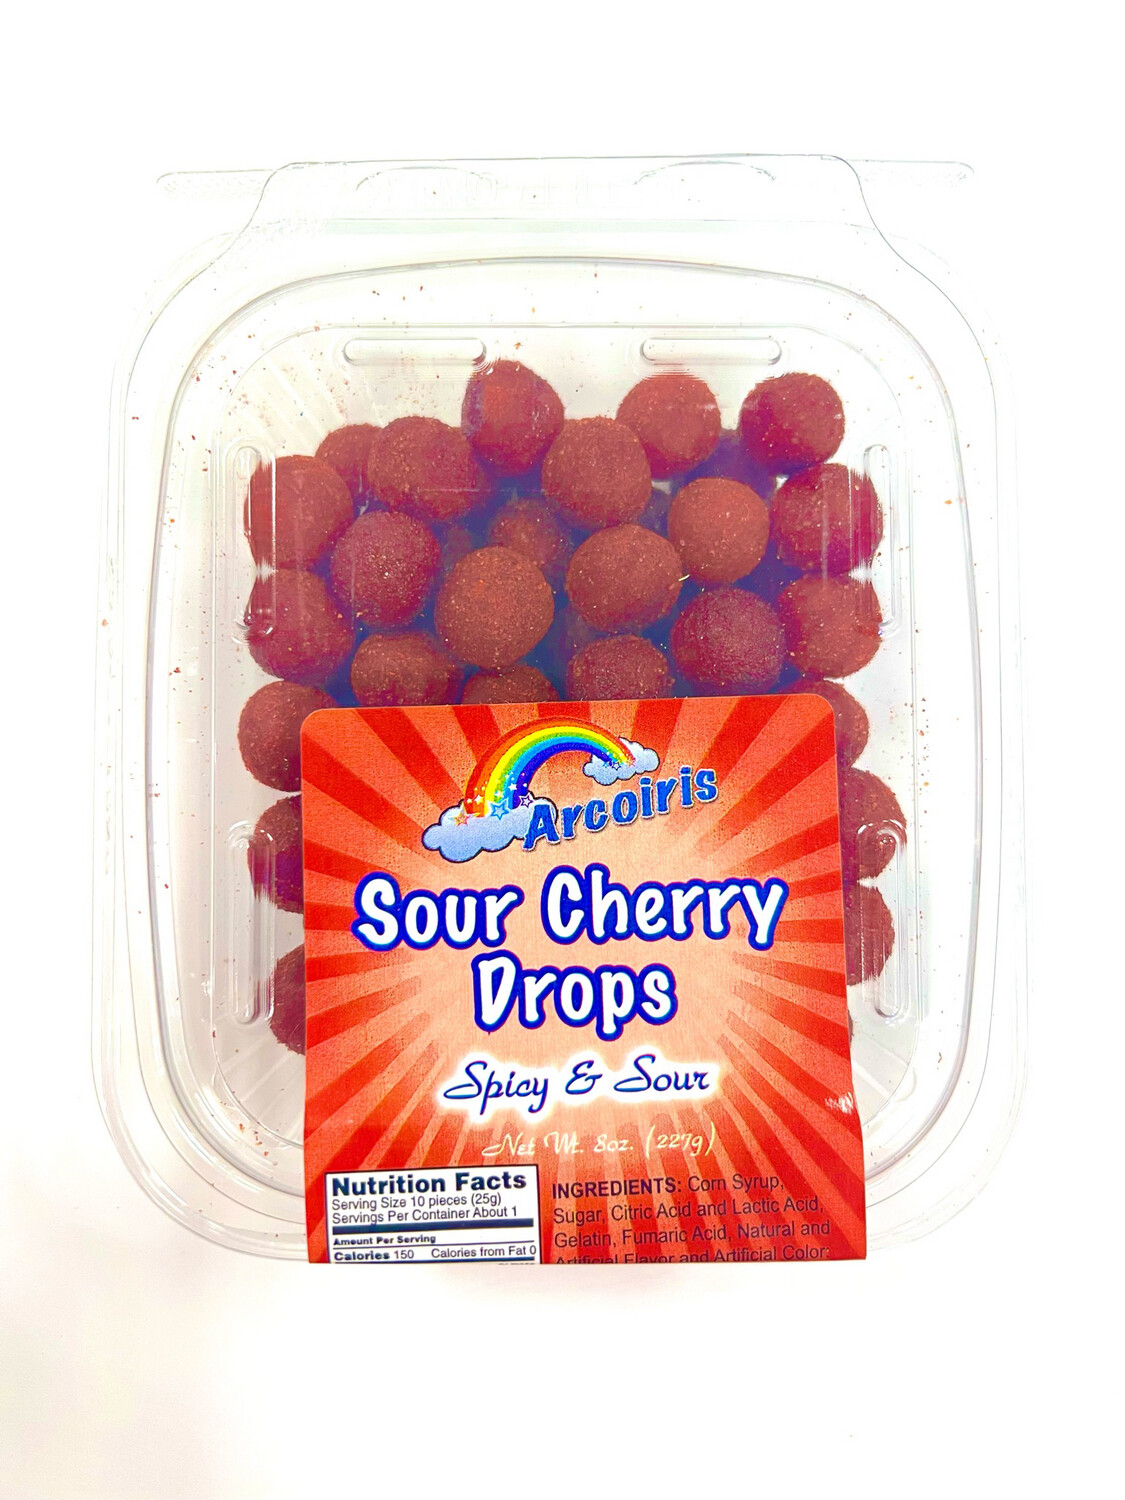 Cherry Drops Spicy and Sour 8oz